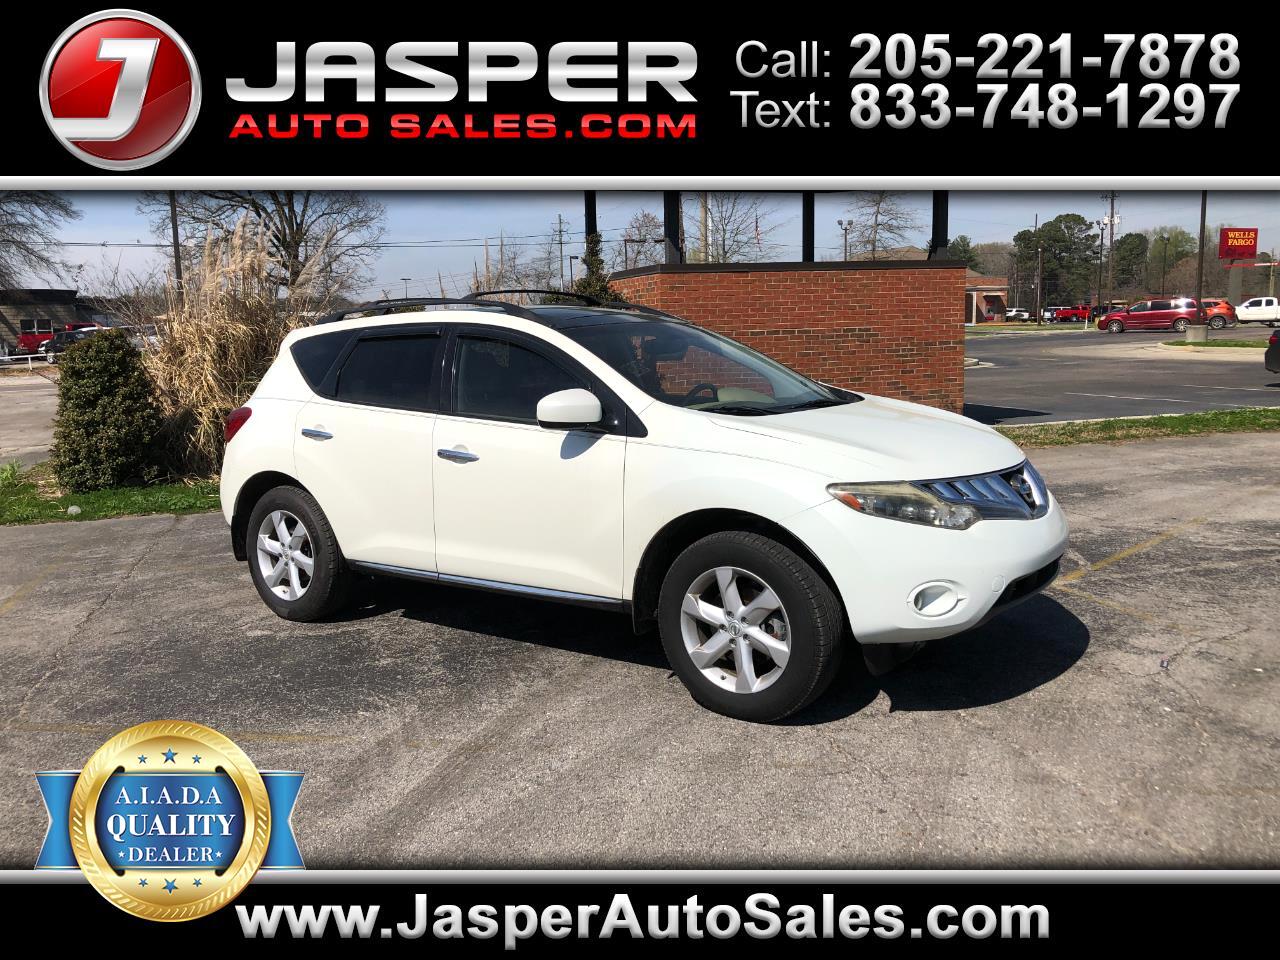 Used Nissan Murano 2009 model, imported from Japan, 6 cylinders, 195000 km  2009 for sale in Dubai - 556311